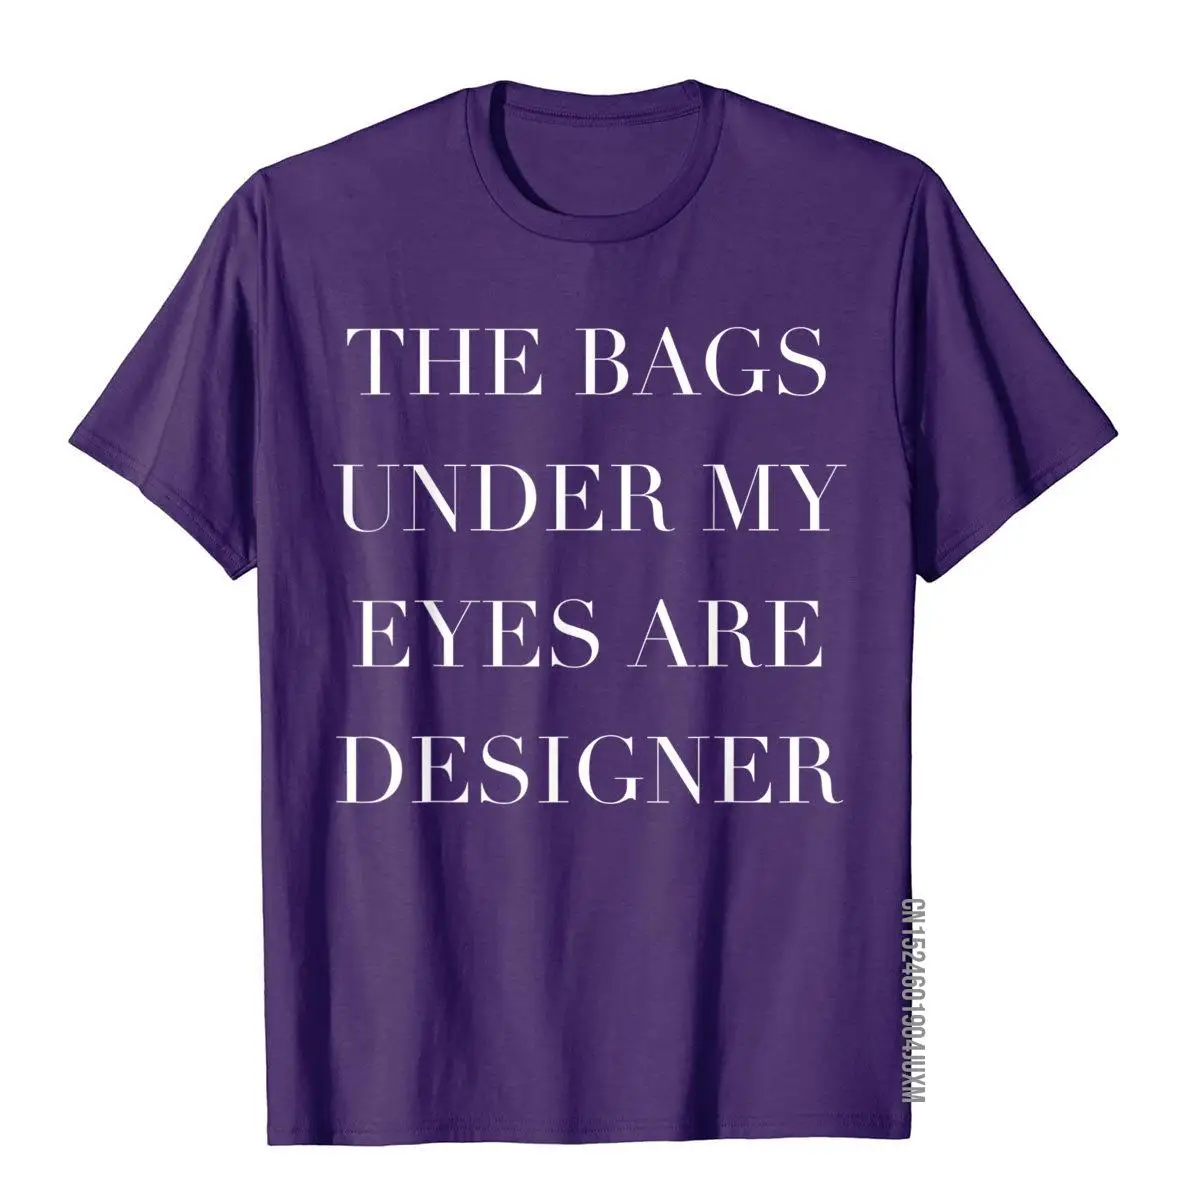 Funny T-shirt - The Bags Under My Eyes Are Designer__97A1676purple